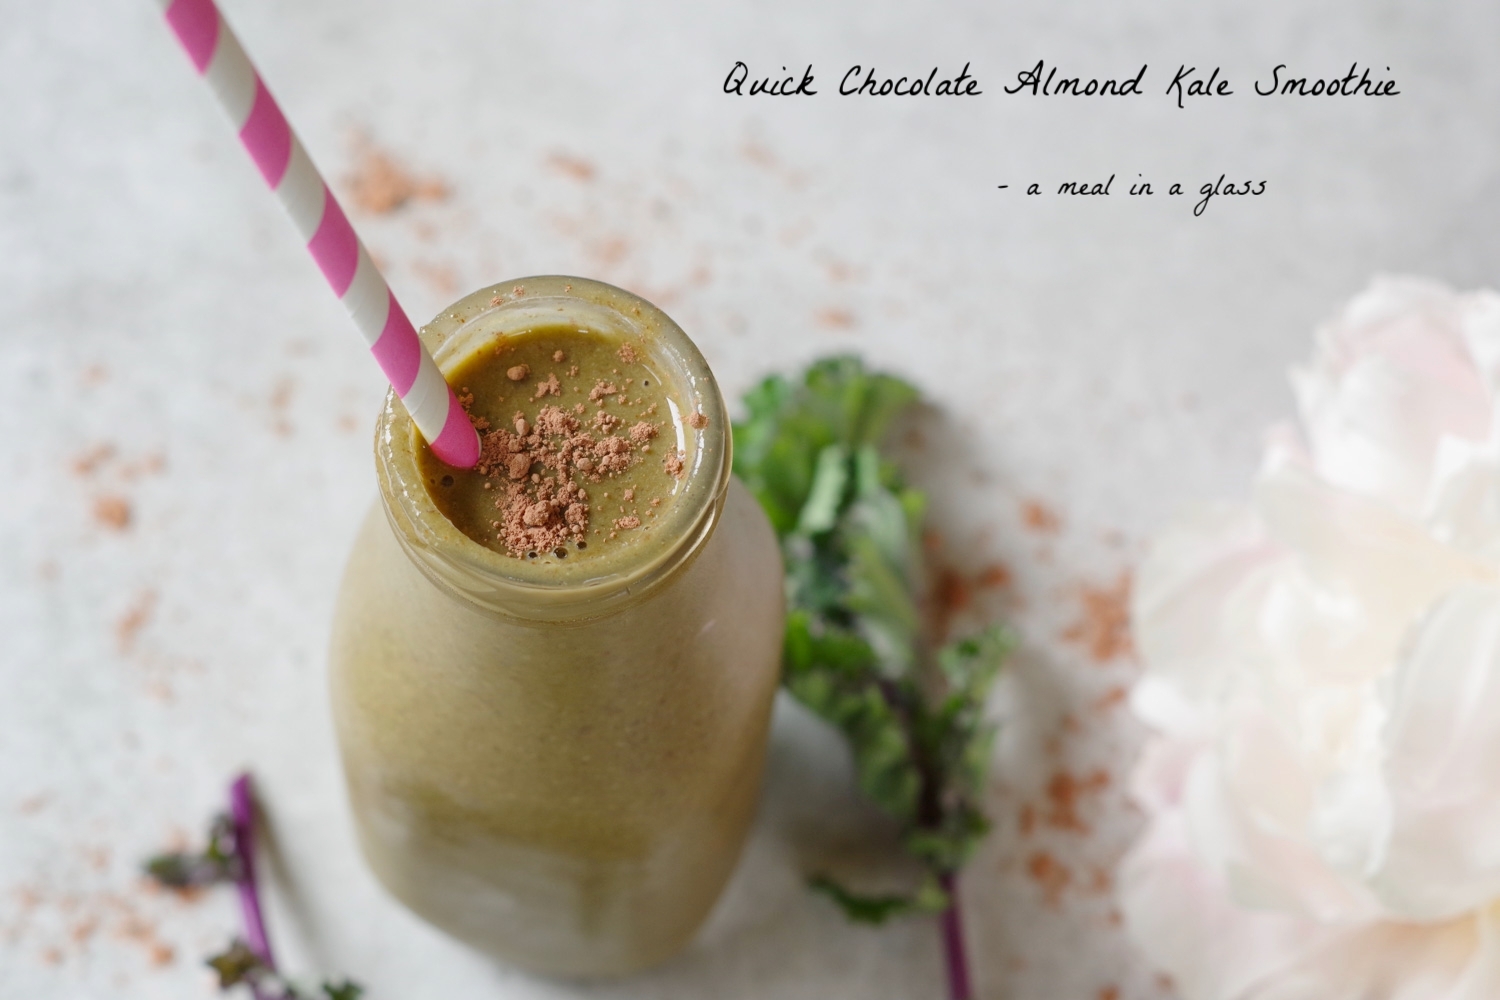 Chocolate Almond Kale Smoothie by Beautiful Ingredient